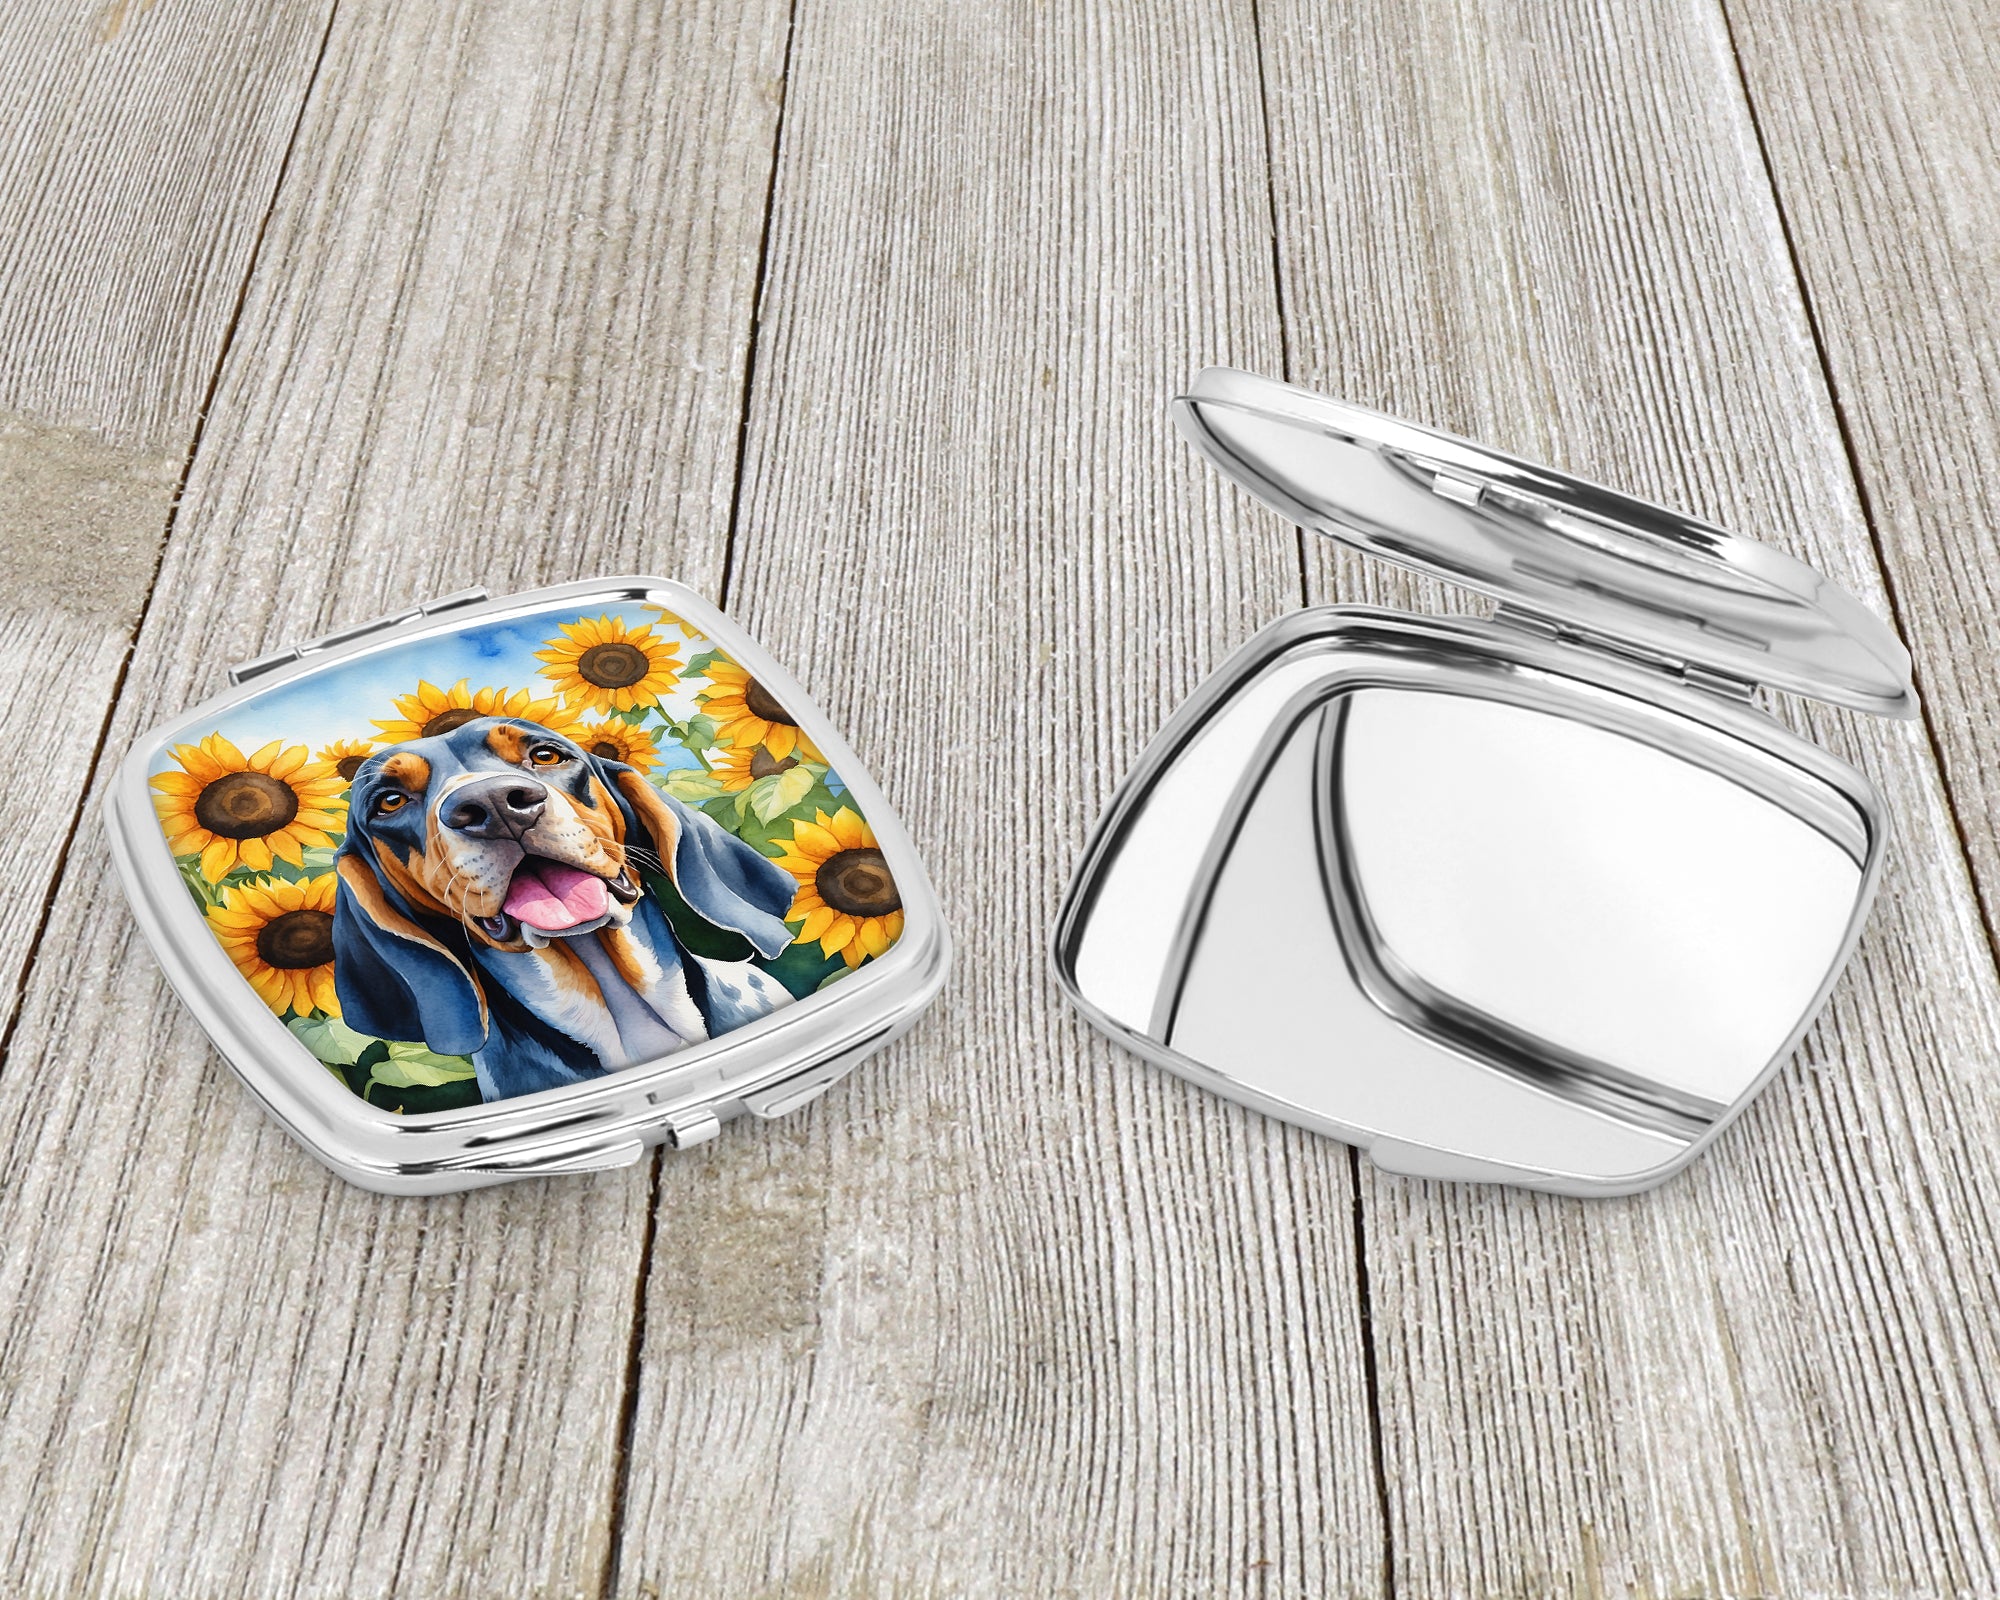 American English Coonhound in Sunflowers Compact Mirror